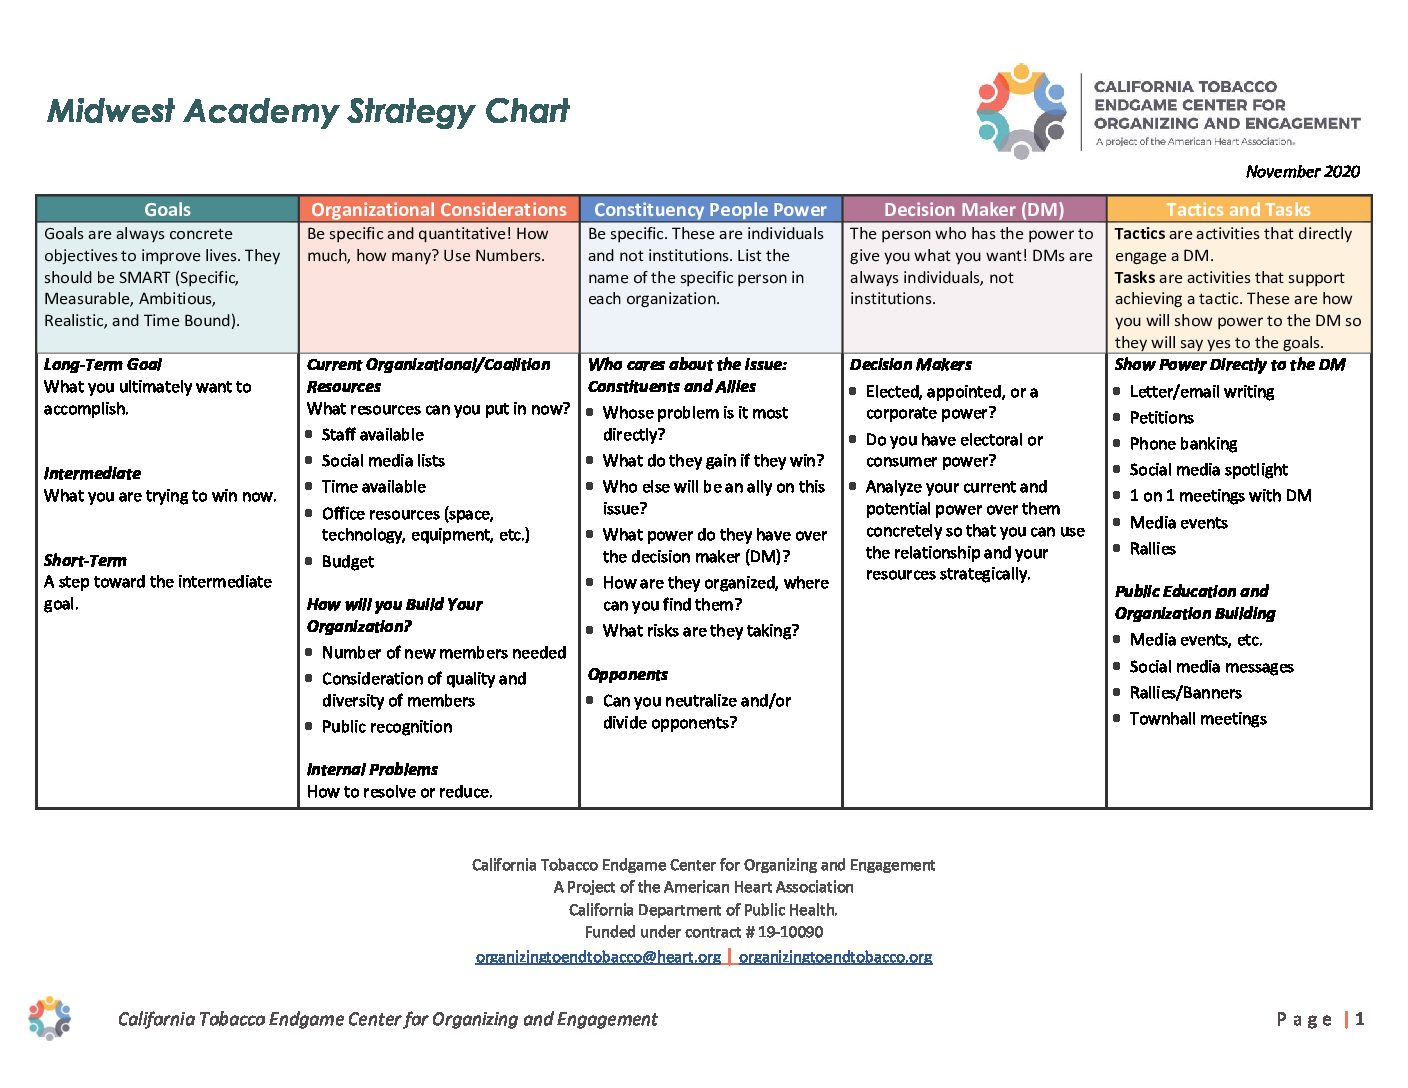 Midwest Academy Strategy Chart (Explained) Tobacco Endgame Center for